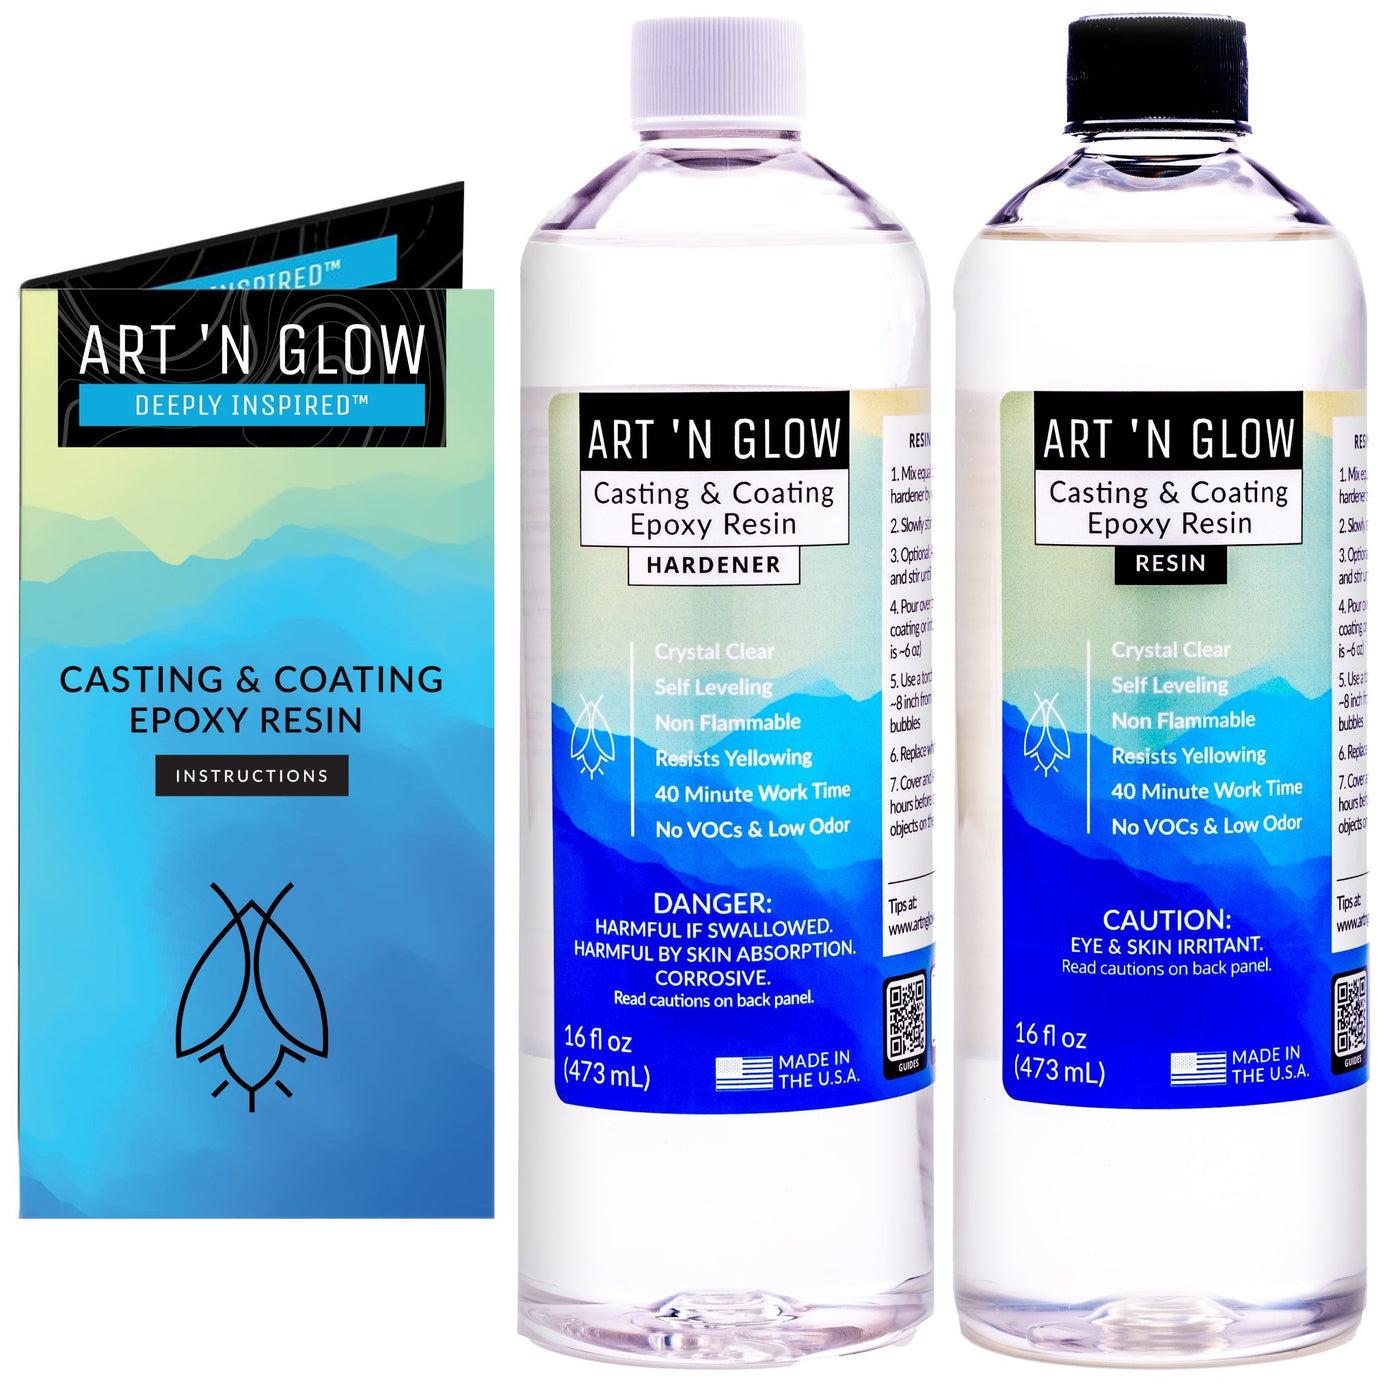 Art 'n Glow Clear Casting and Coating Epoxy Resin - 32 Ounce Kit